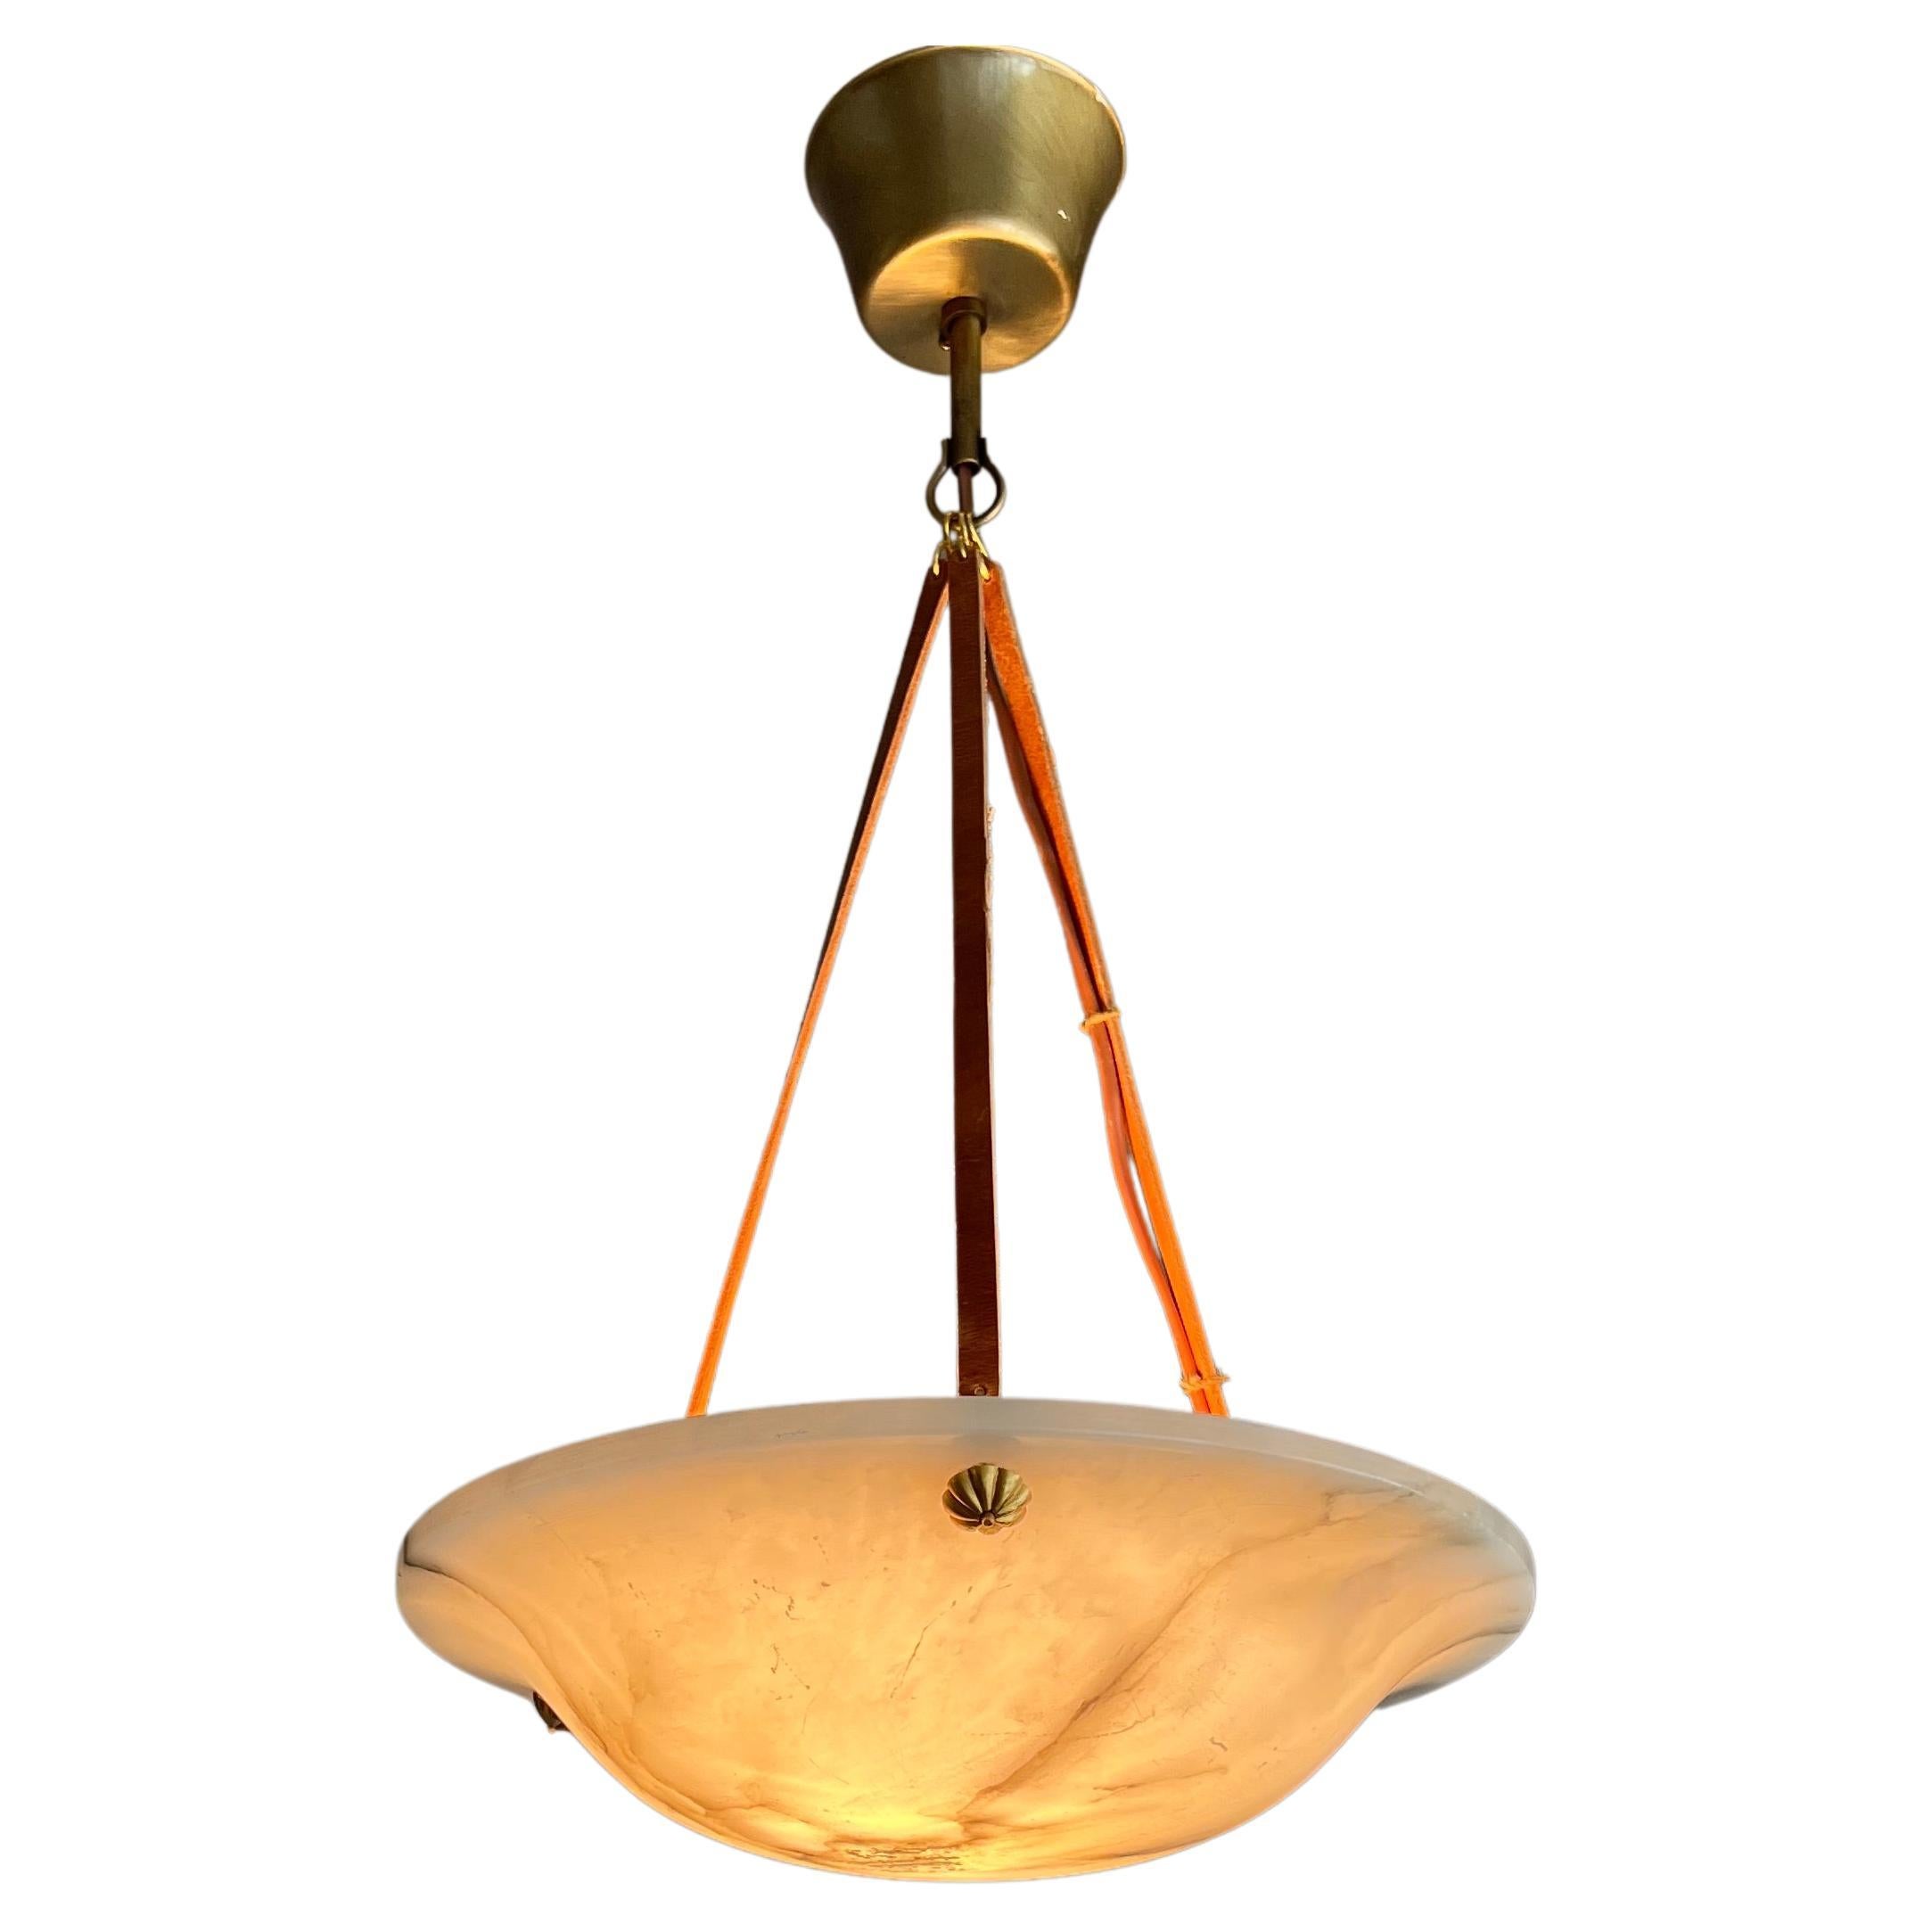 Small & Timeless French Art Deco Alabaster Pendant Light with Leather Rope, 1920 For Sale